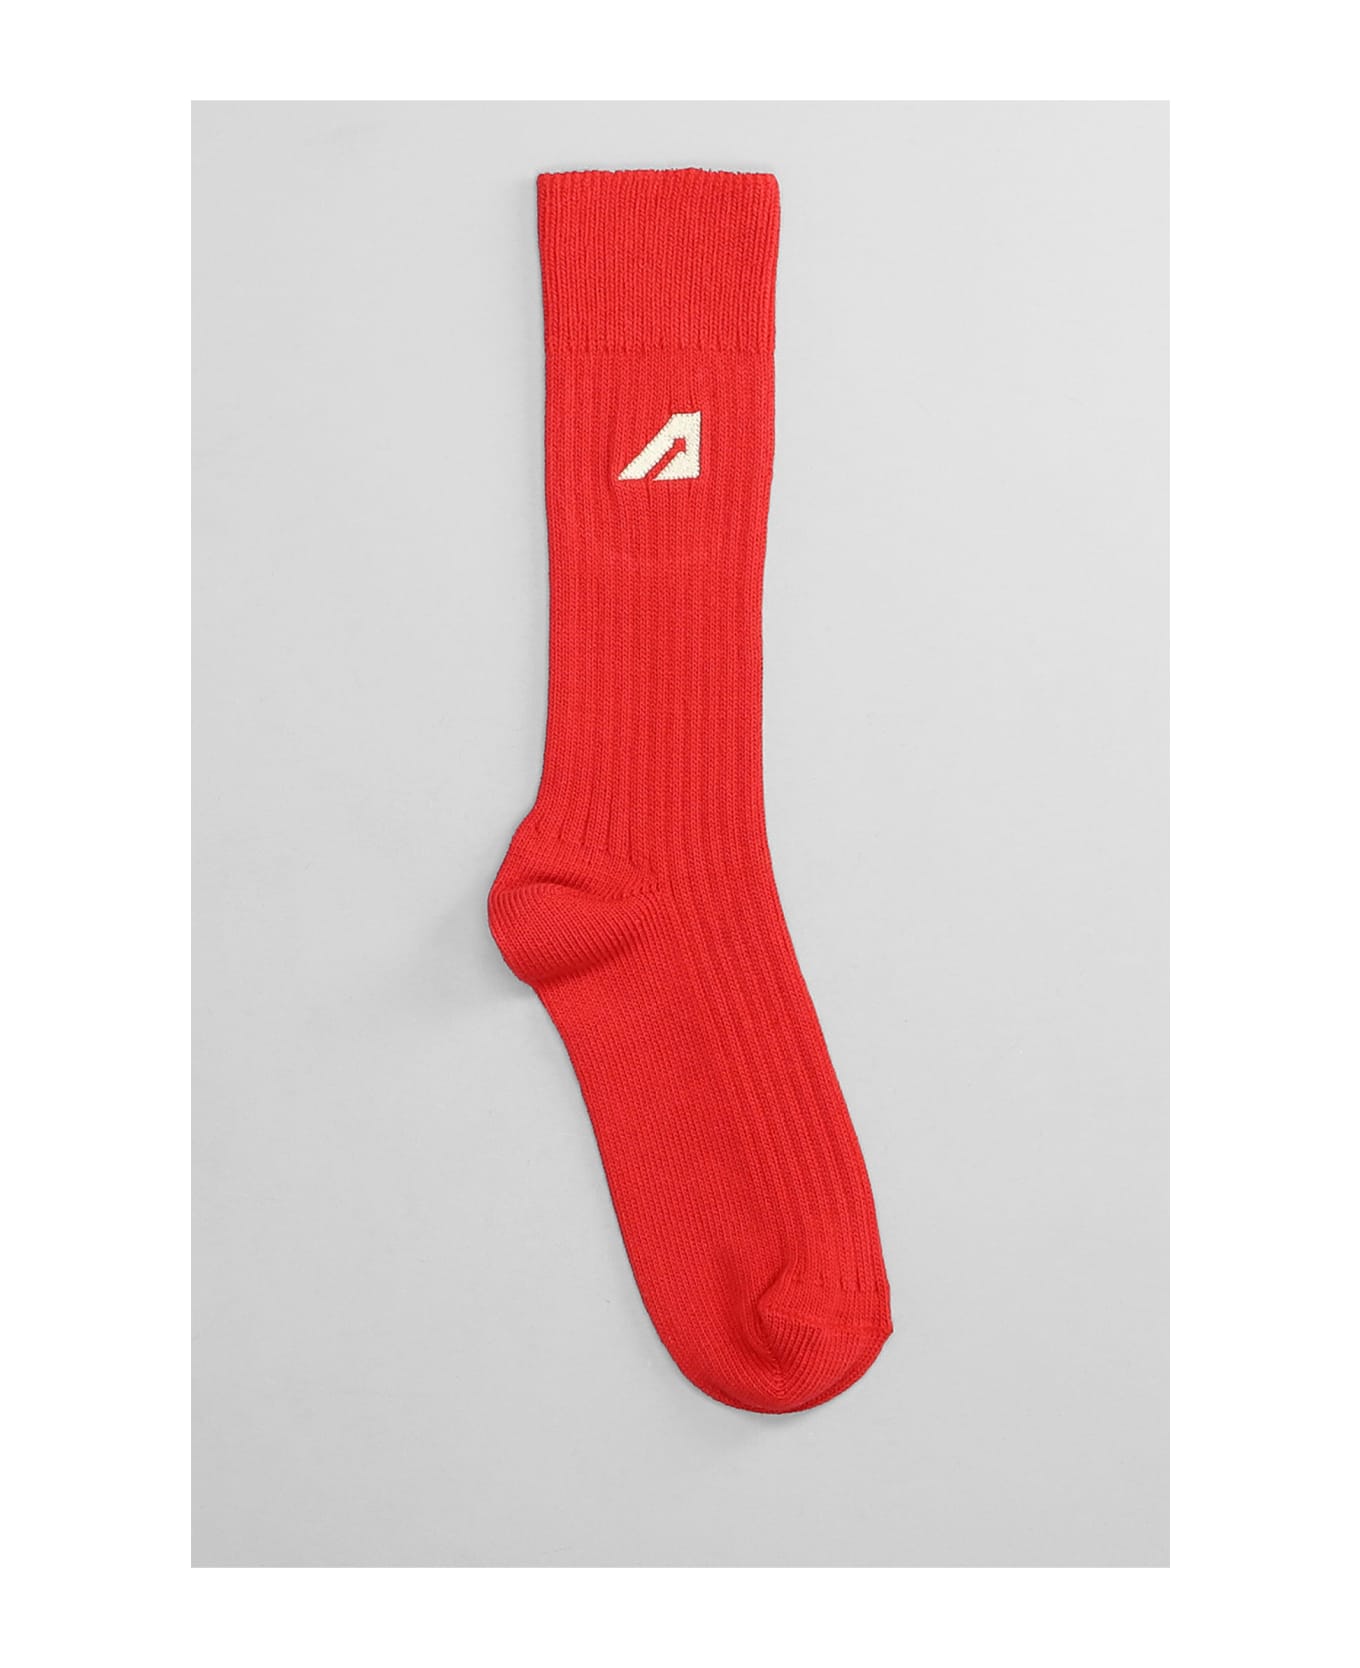 Autry Socks In Red Cotton - red 靴下